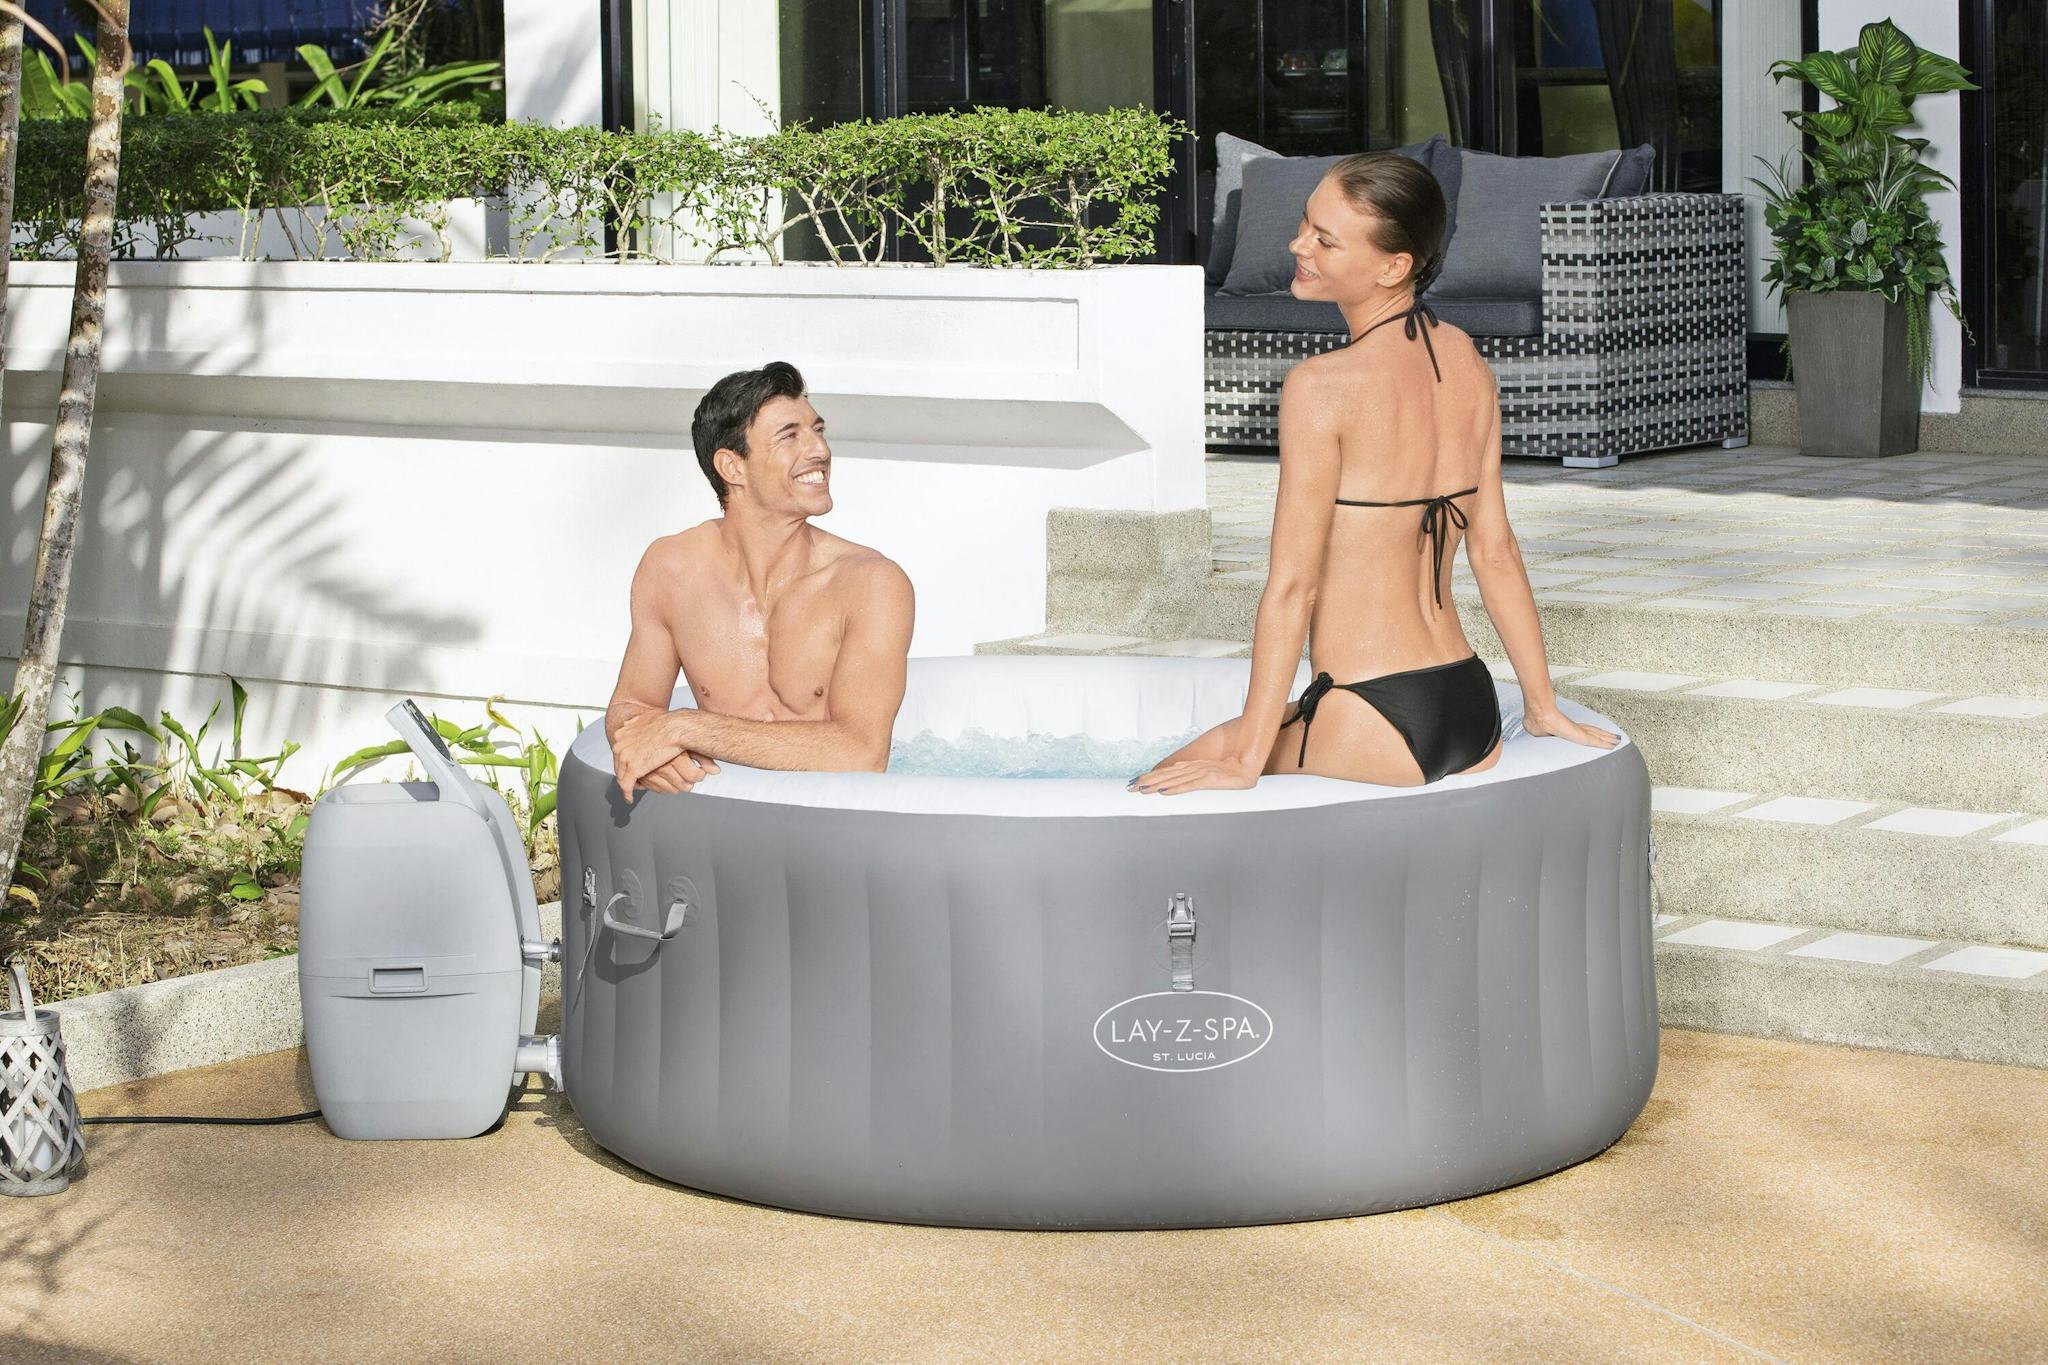 Spas Gonflables Spa gonflable rond St. Lucia AirJet™ Lay-Z-Spa®  2-3 personnes Bestway 16